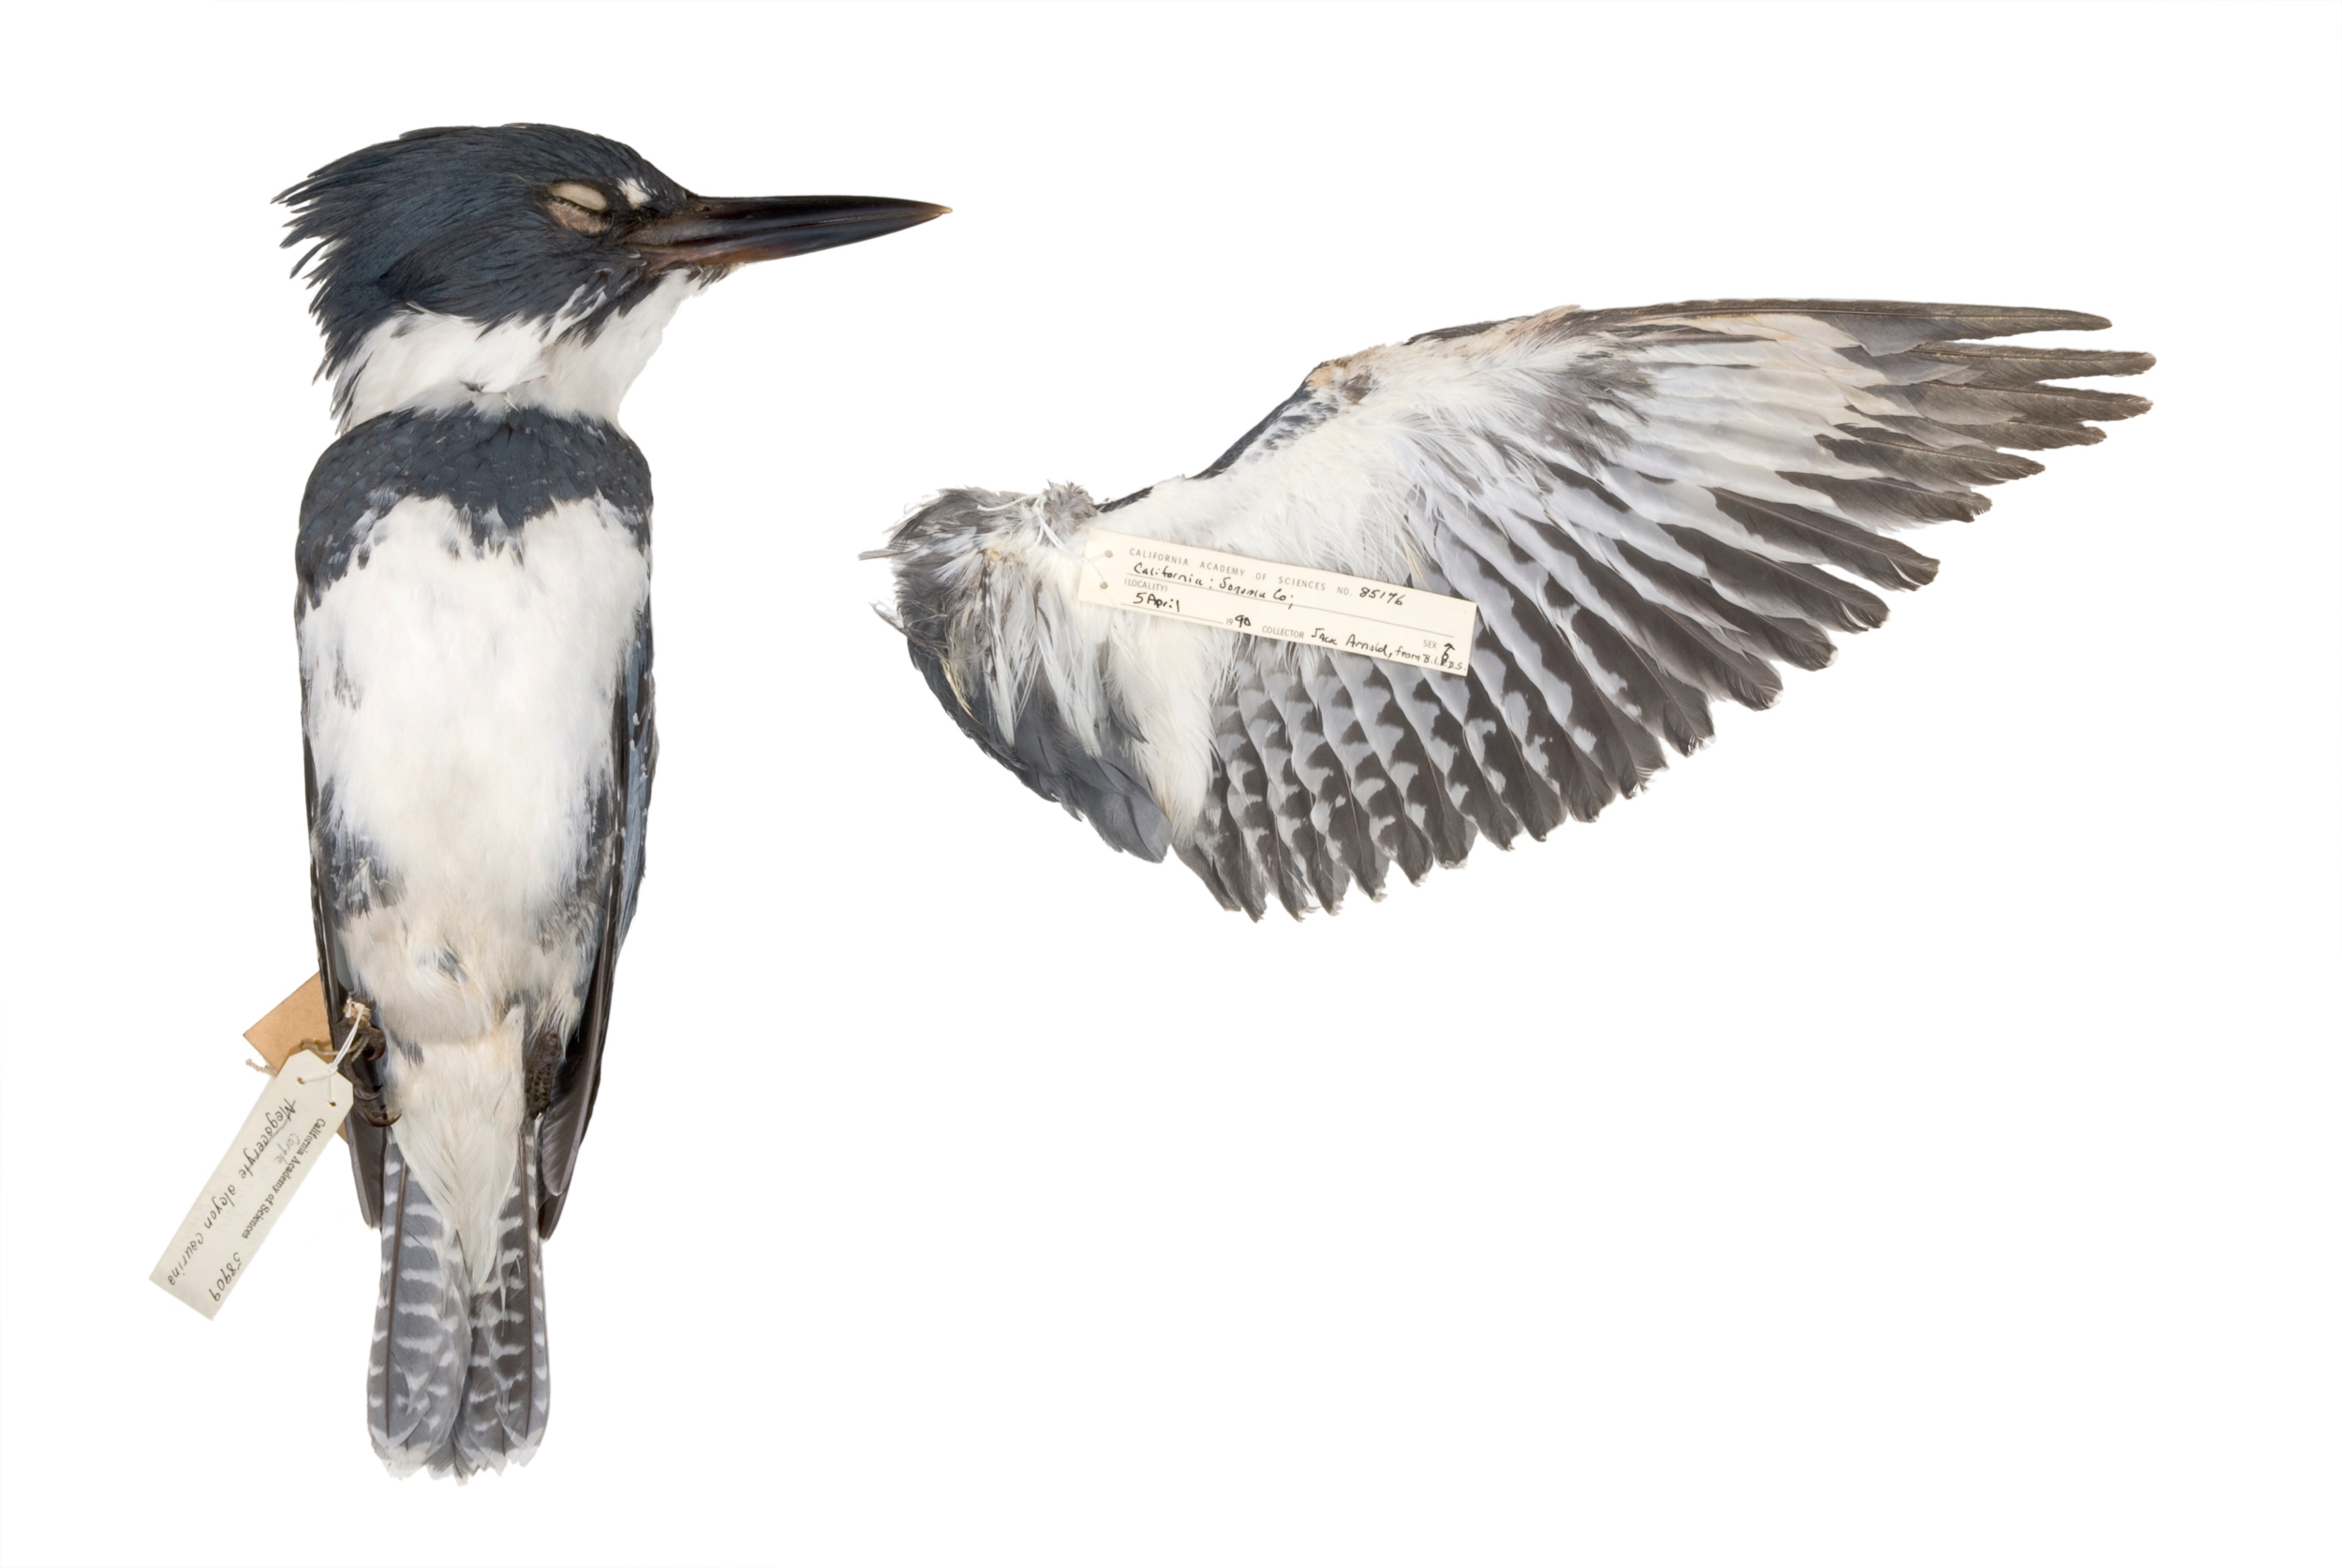   belted kingfisher 1   8" x 12" or 12" x 18"  2007    